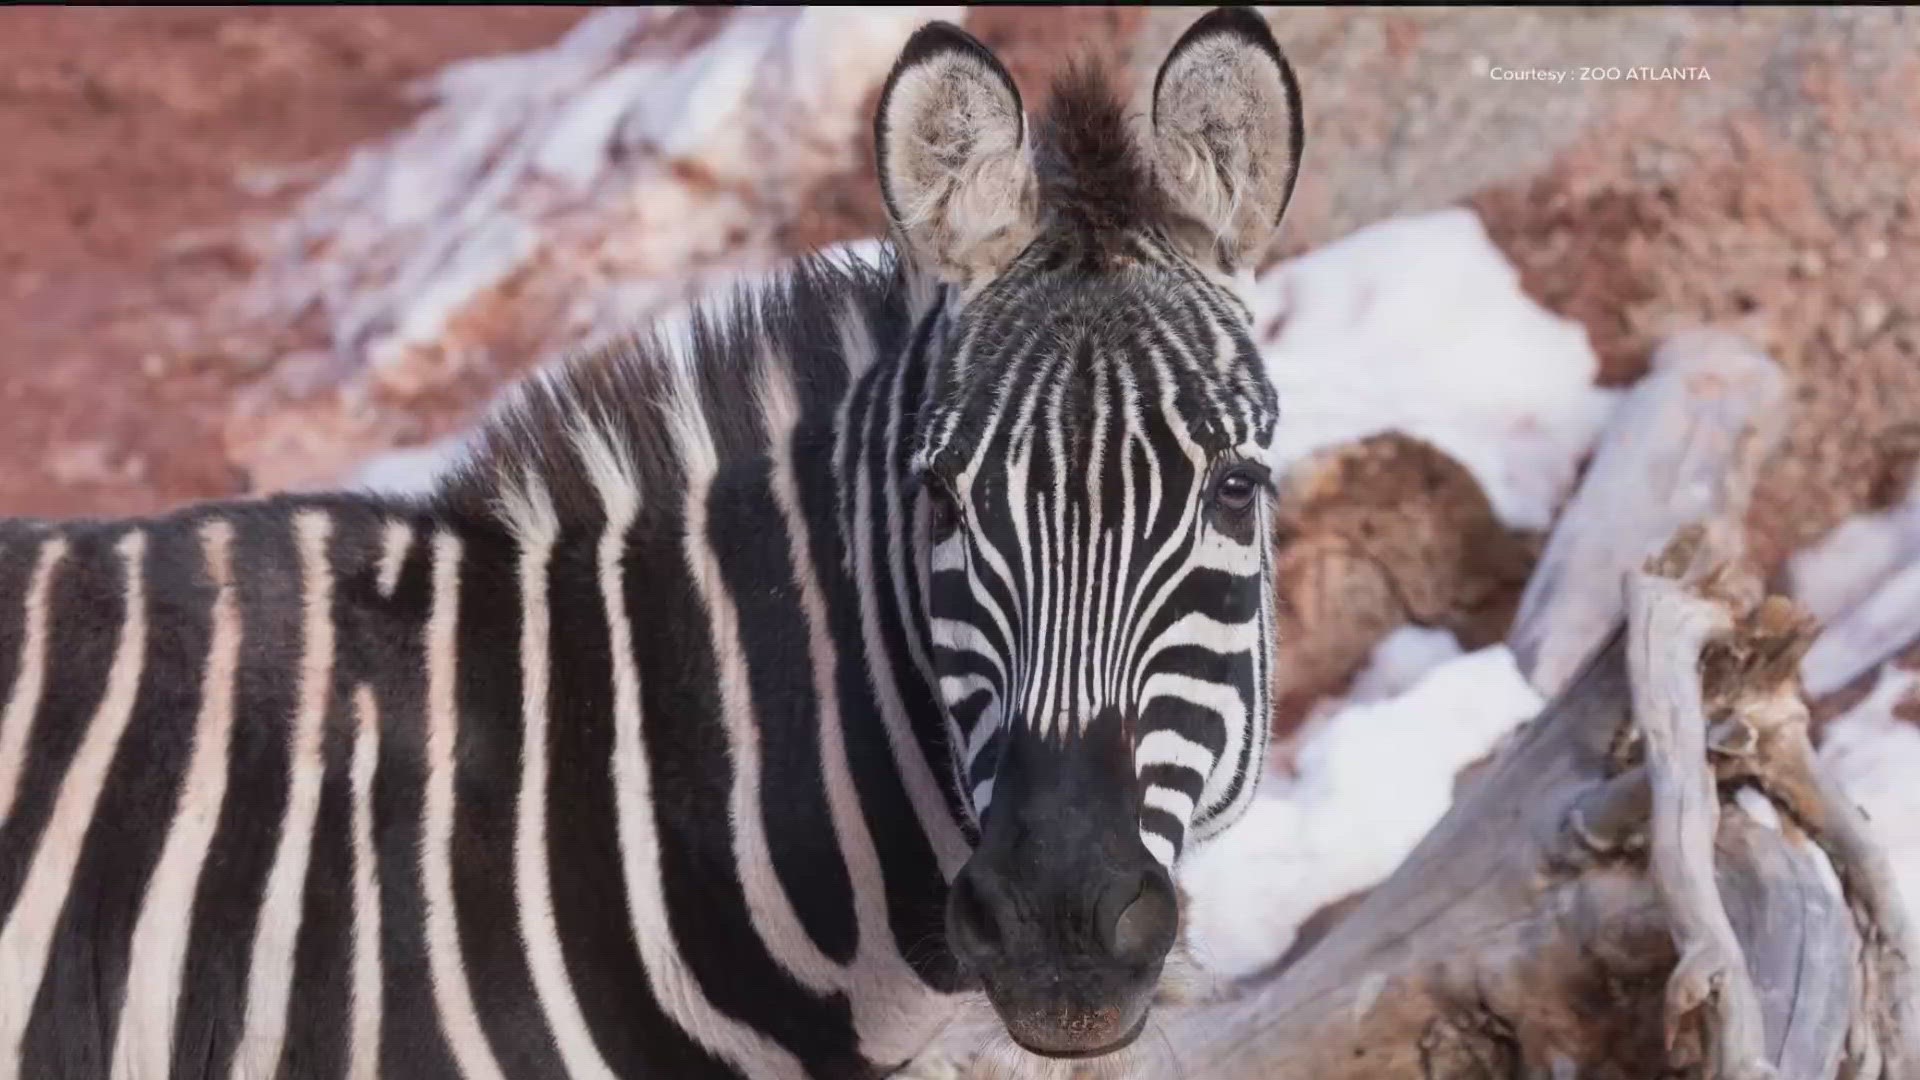 Zoo Atlanta is welcoming the newest member of its family Tuesday, a 17-year-old zebra named Wembe.